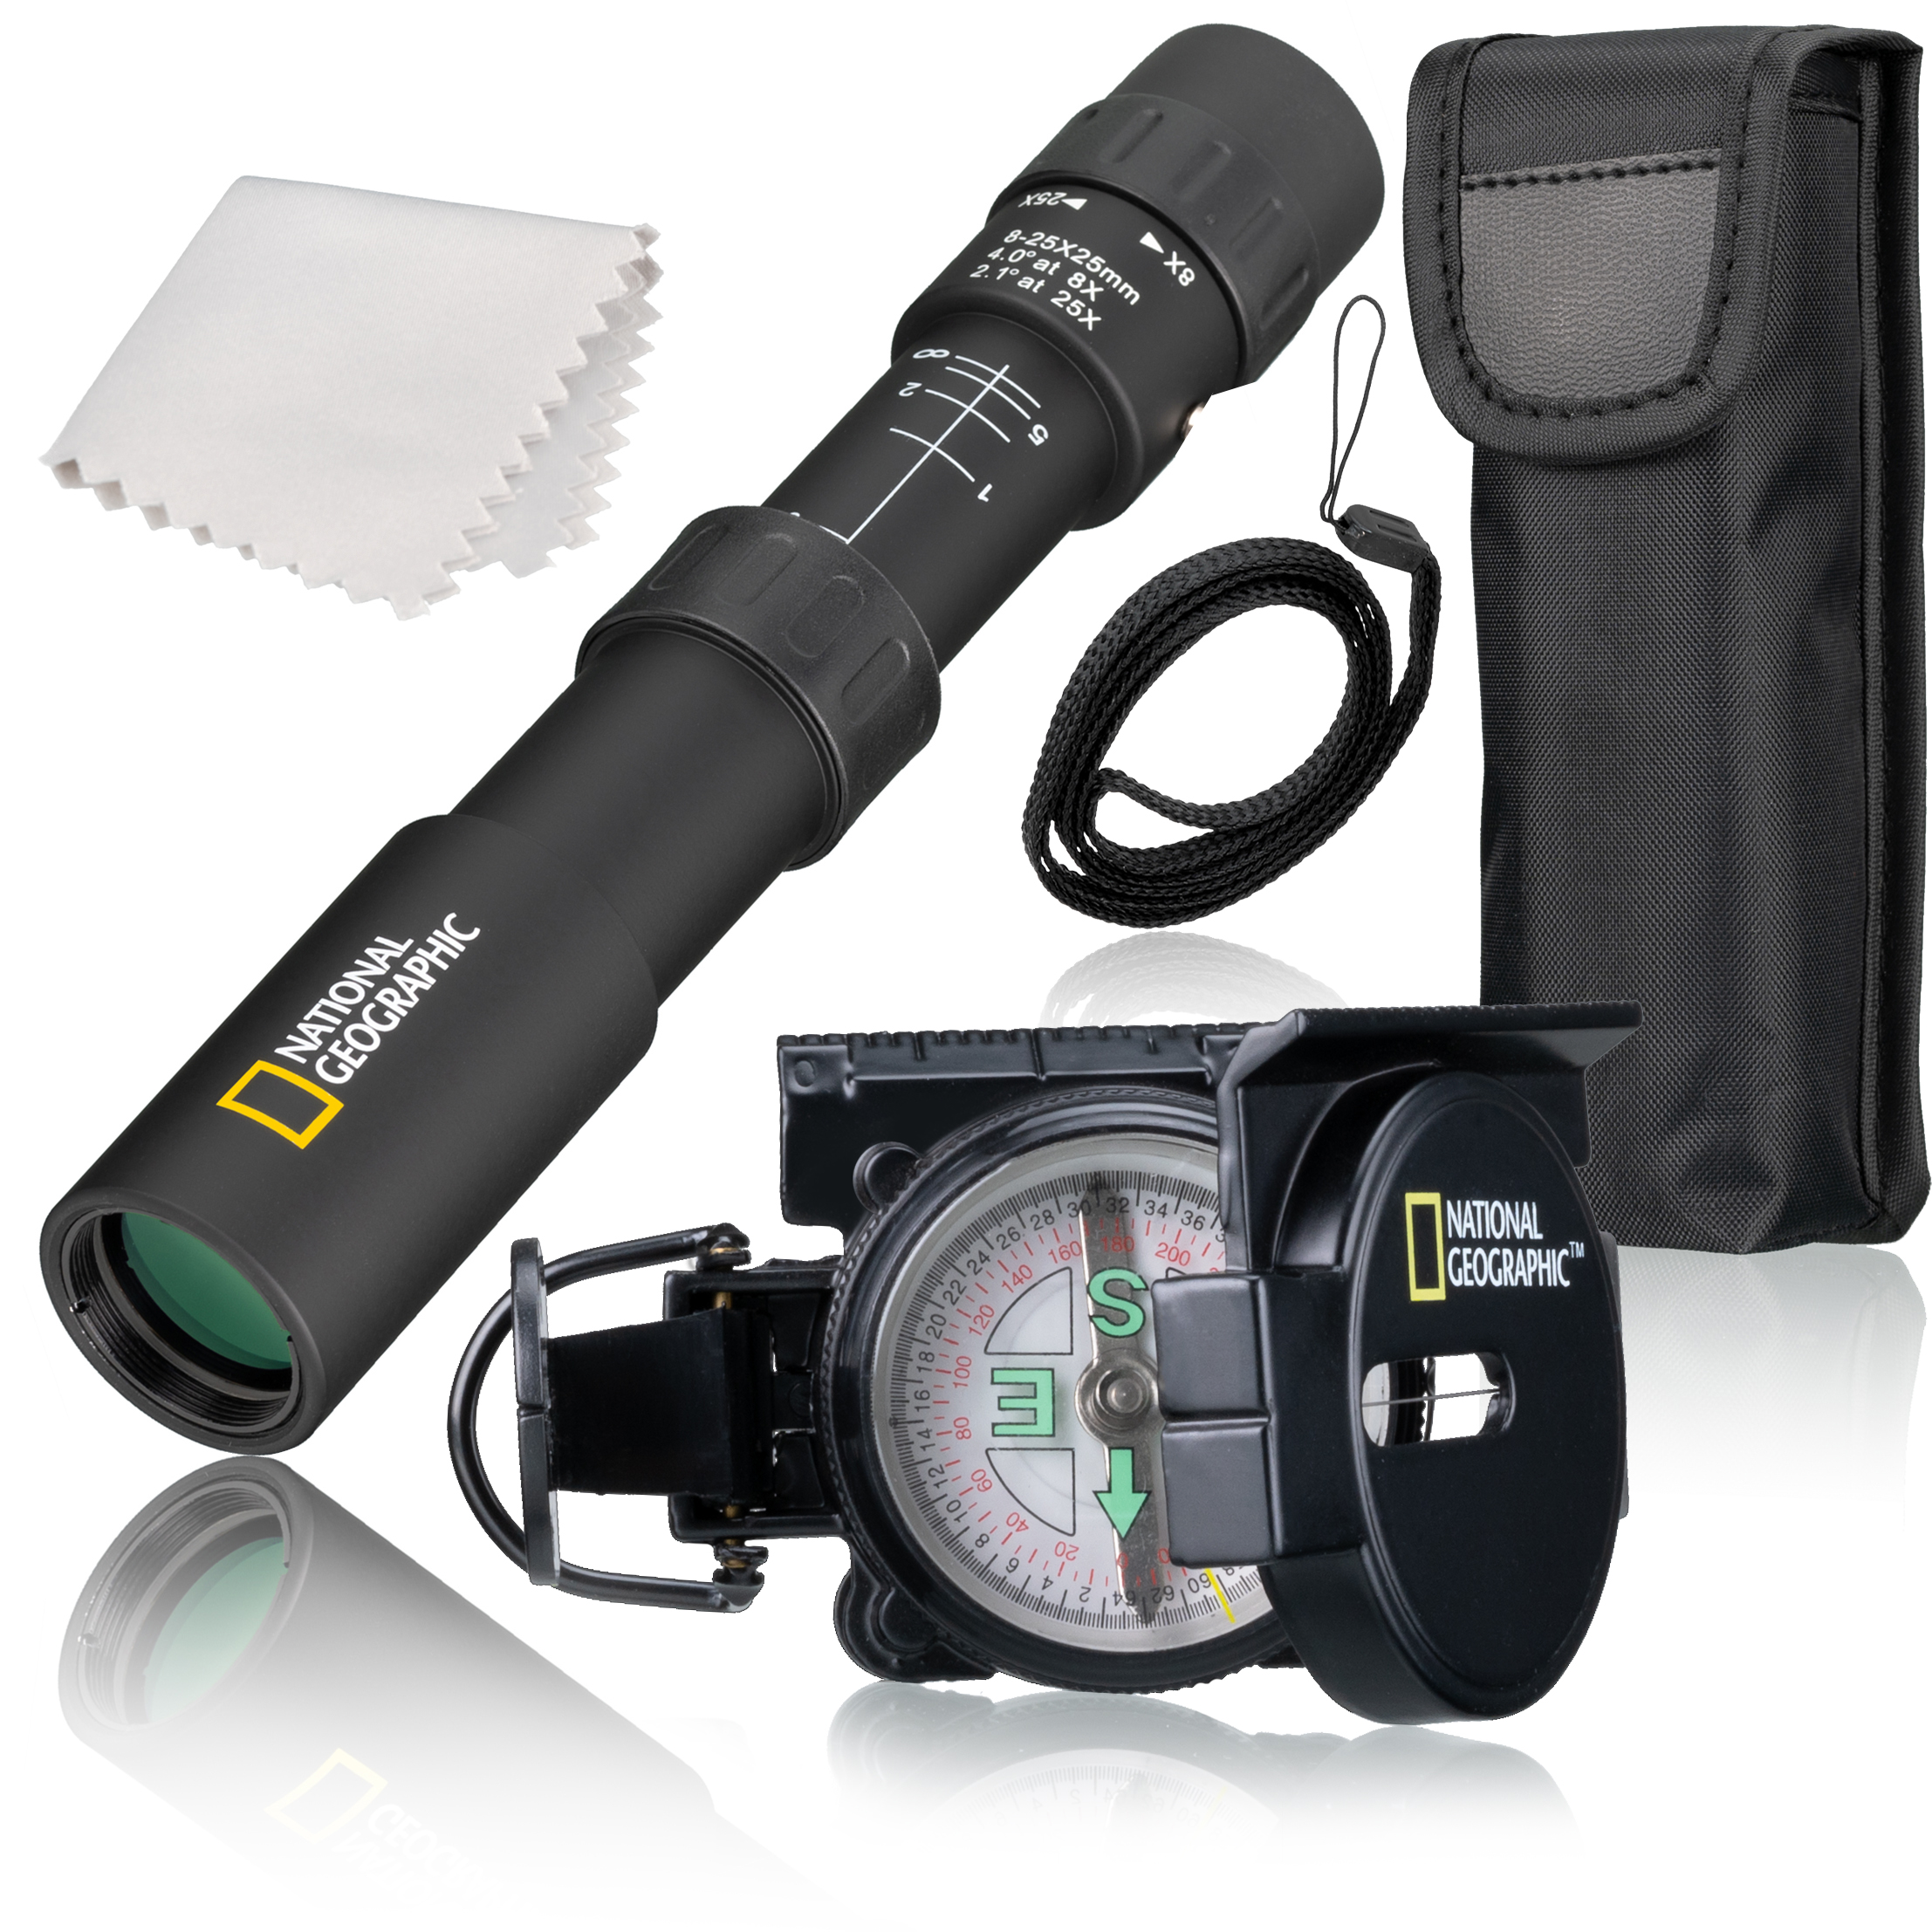 NATIONAL GEOGRAPHIC 8-25x25 Zoom Monocular + free NATIONAL GEOGRAPHIC Compass